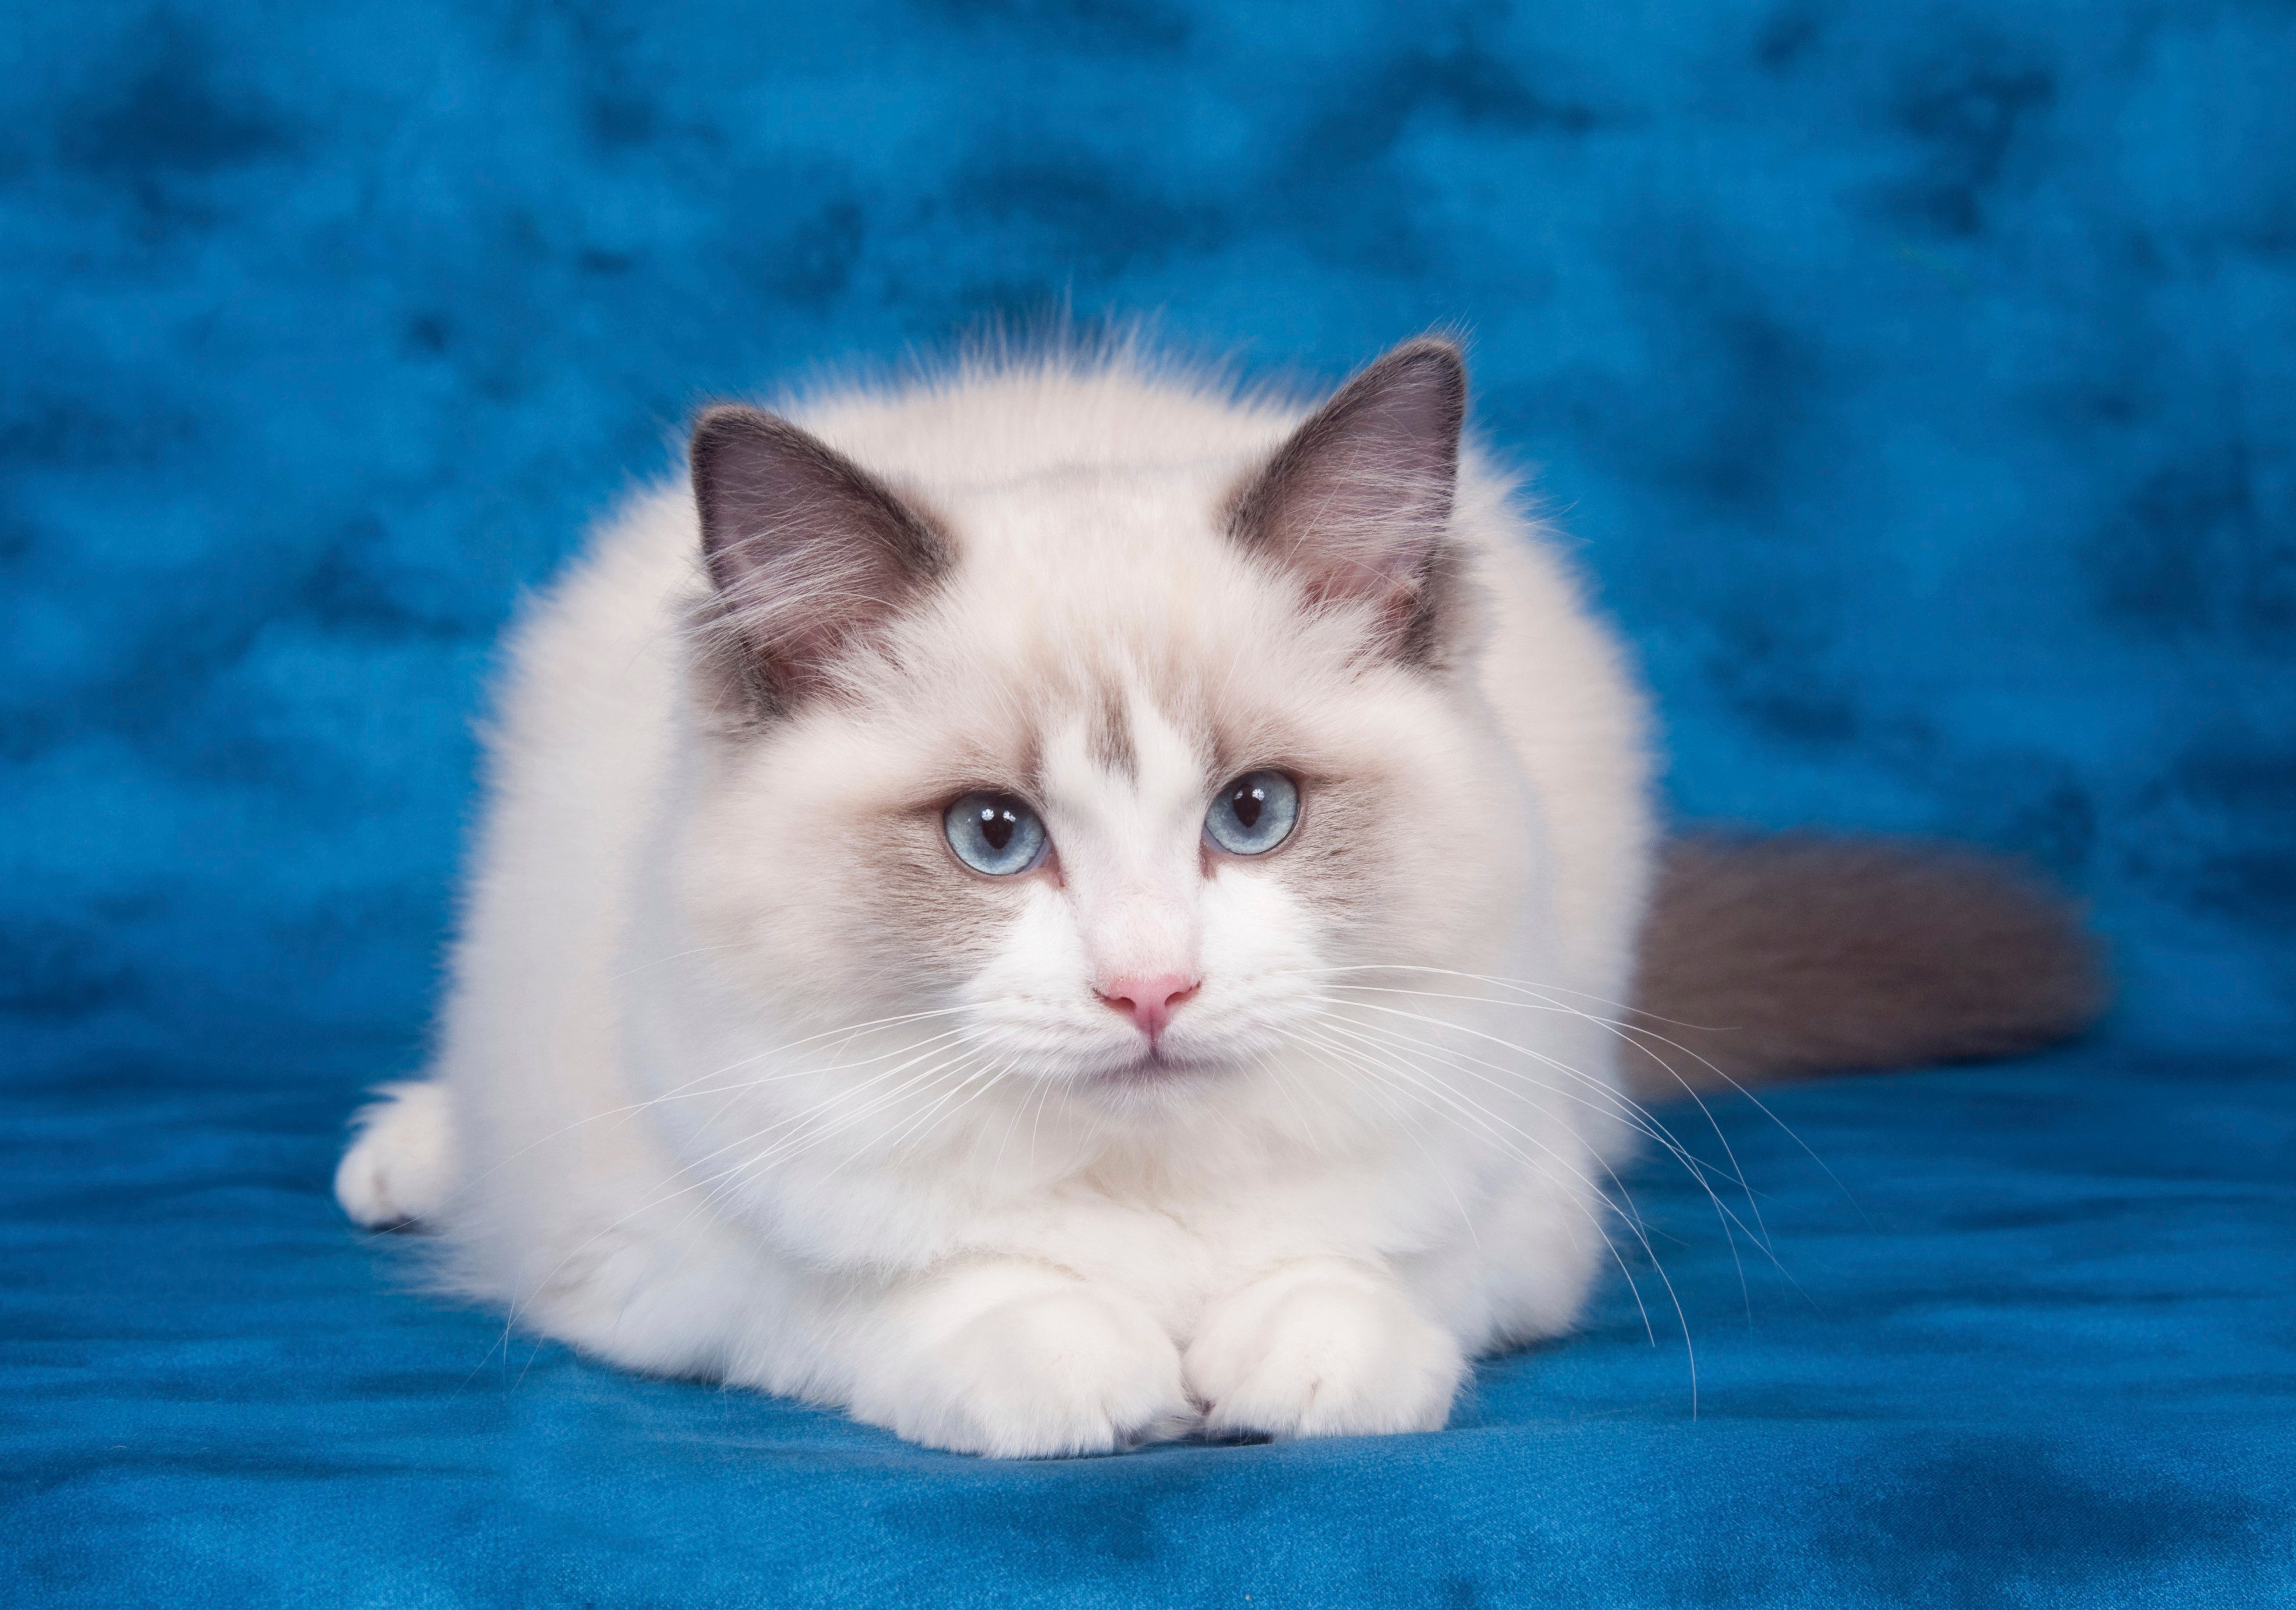 Choosing the Purrfect Ragdoll: Deciding on the Best Breed - catmags.com